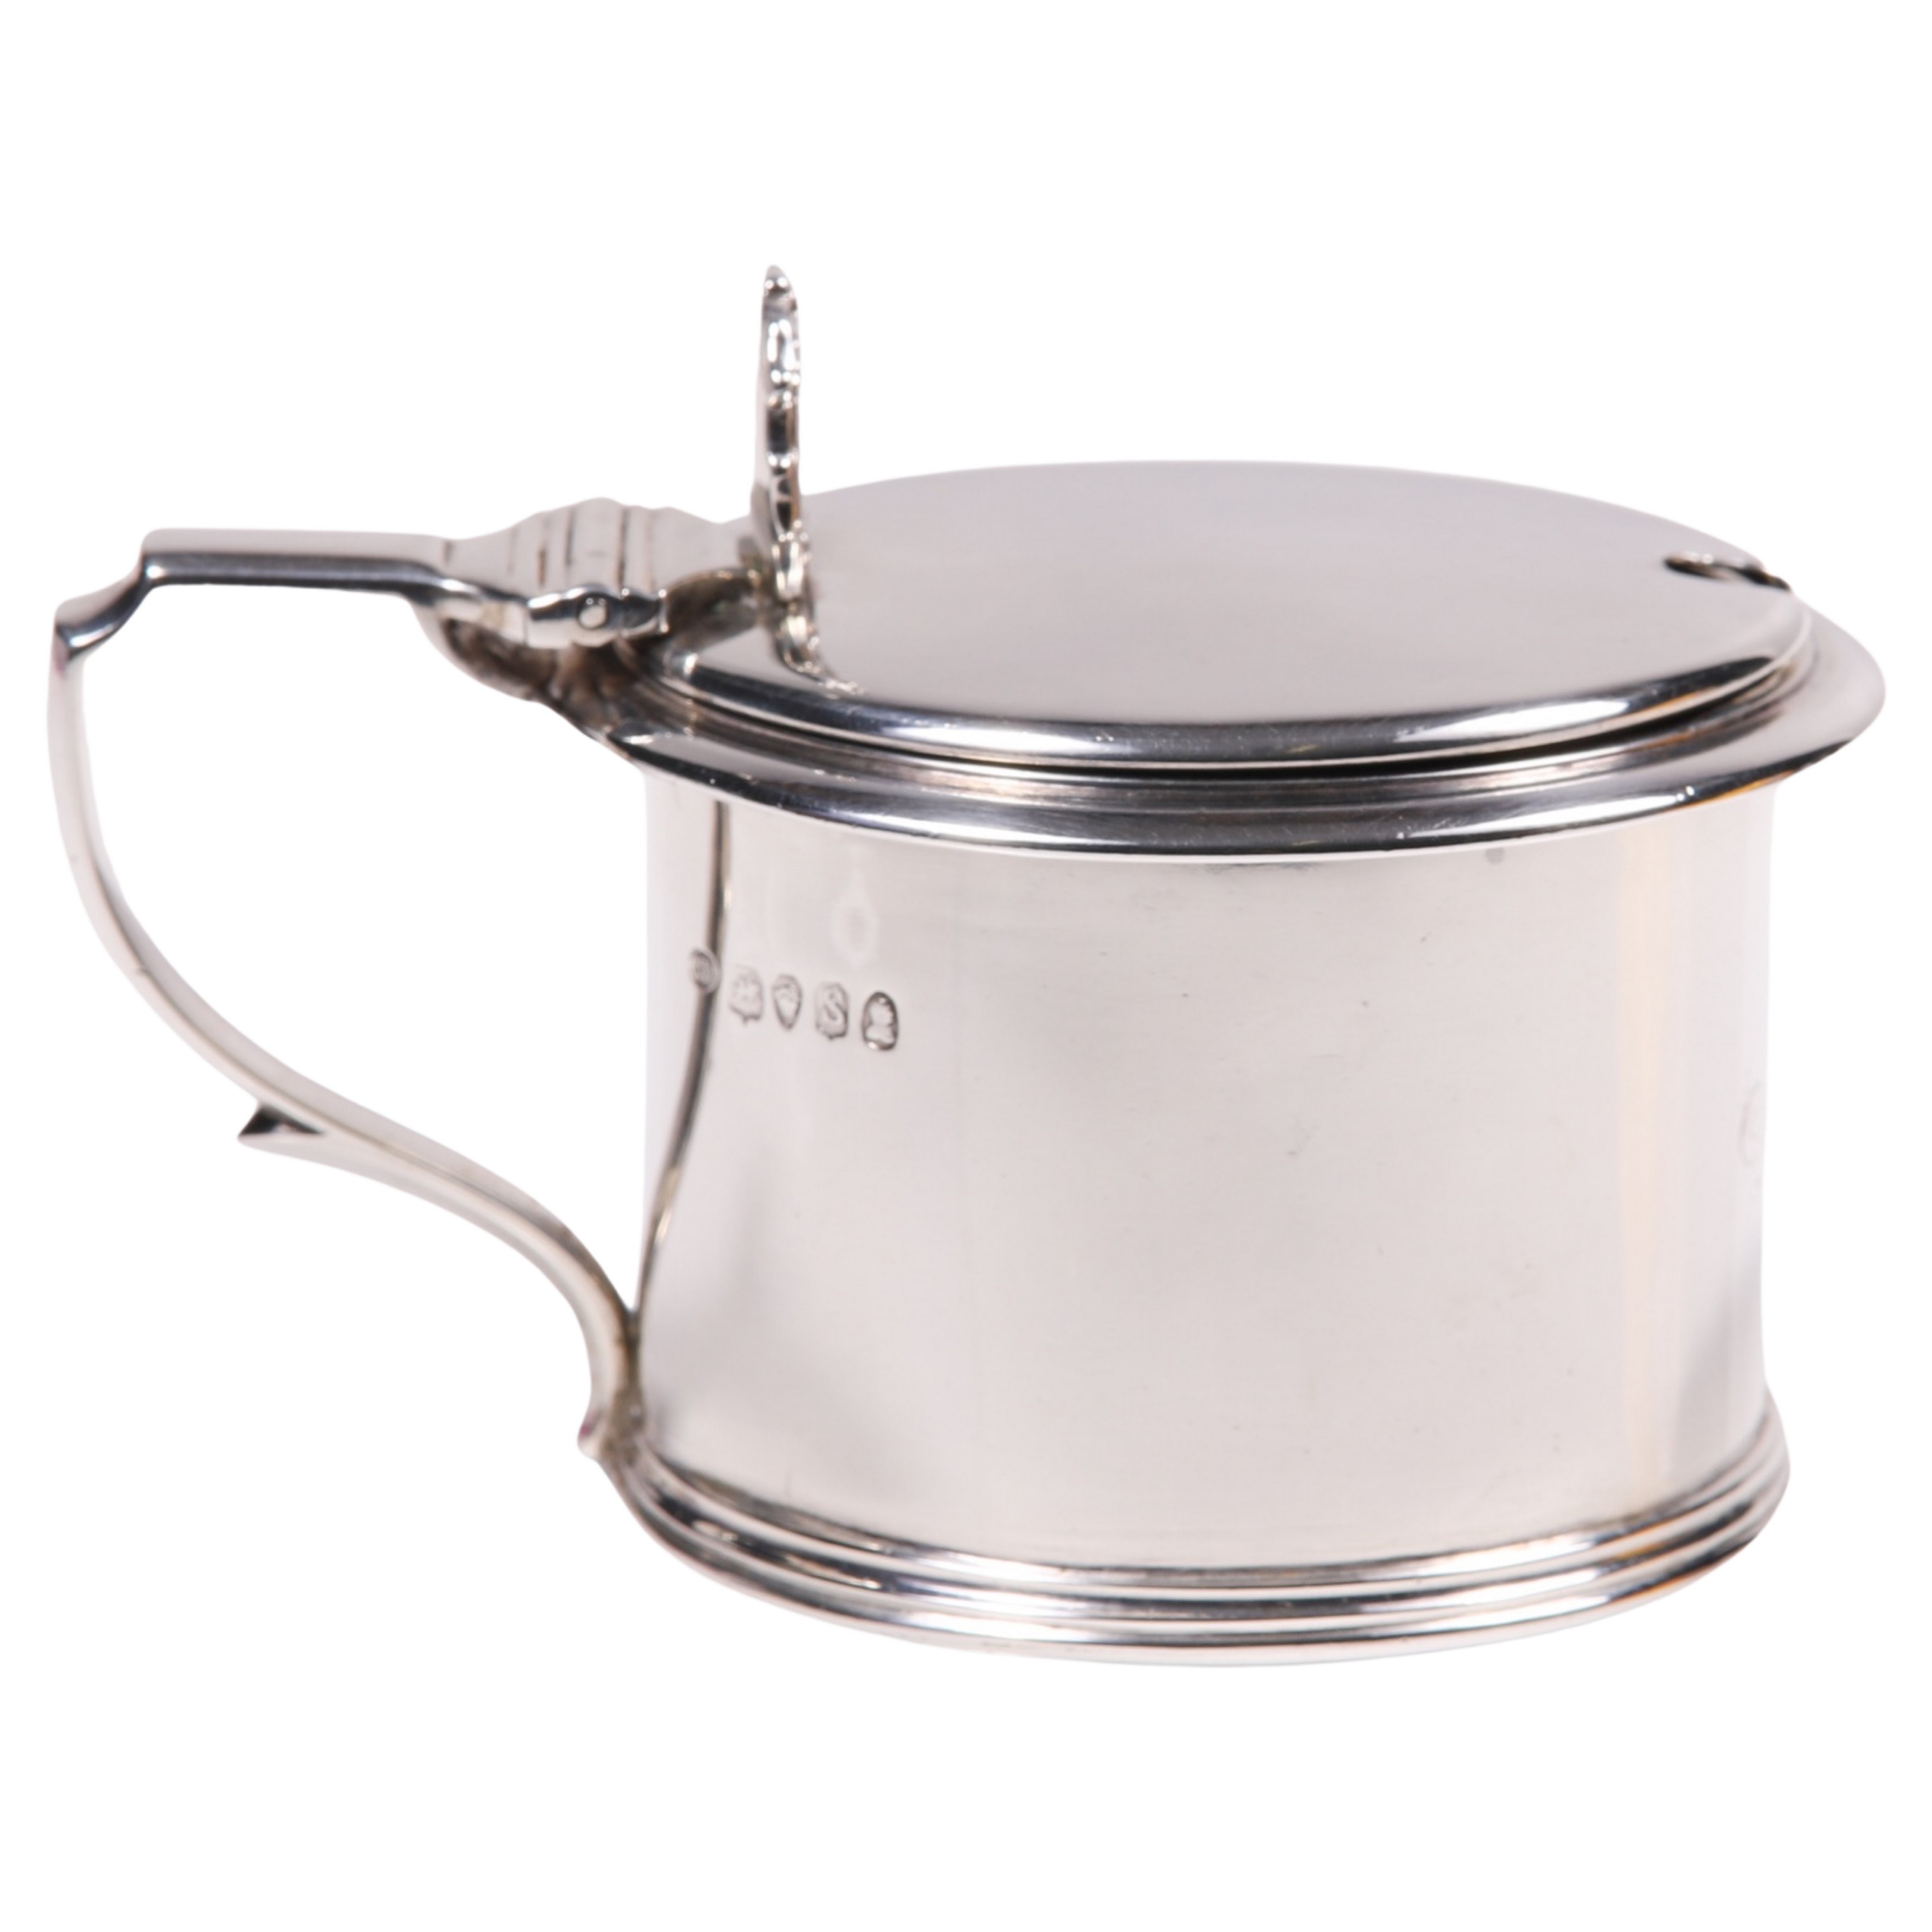 William IV silver mustard pot with